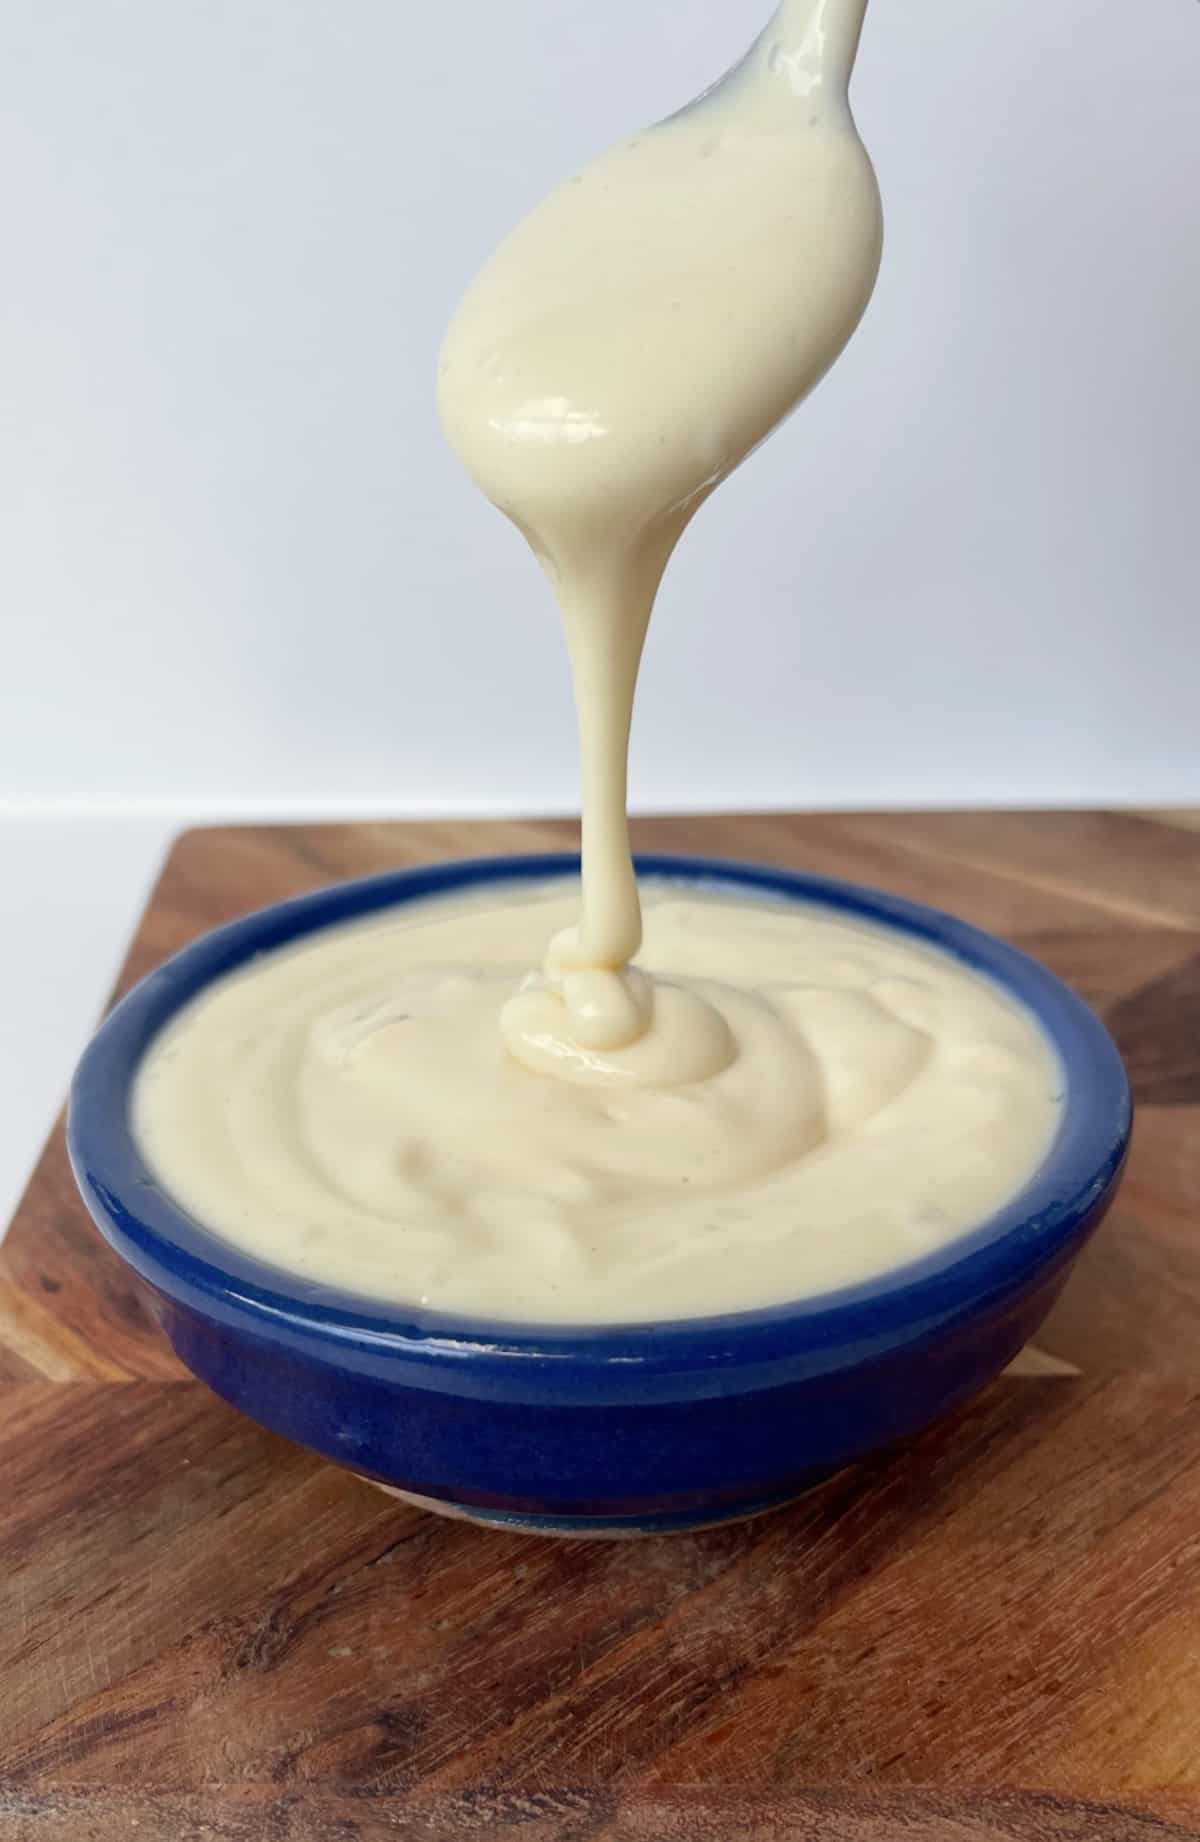 Mayonnaise being drizzled into a small blue bowl from a spoon.